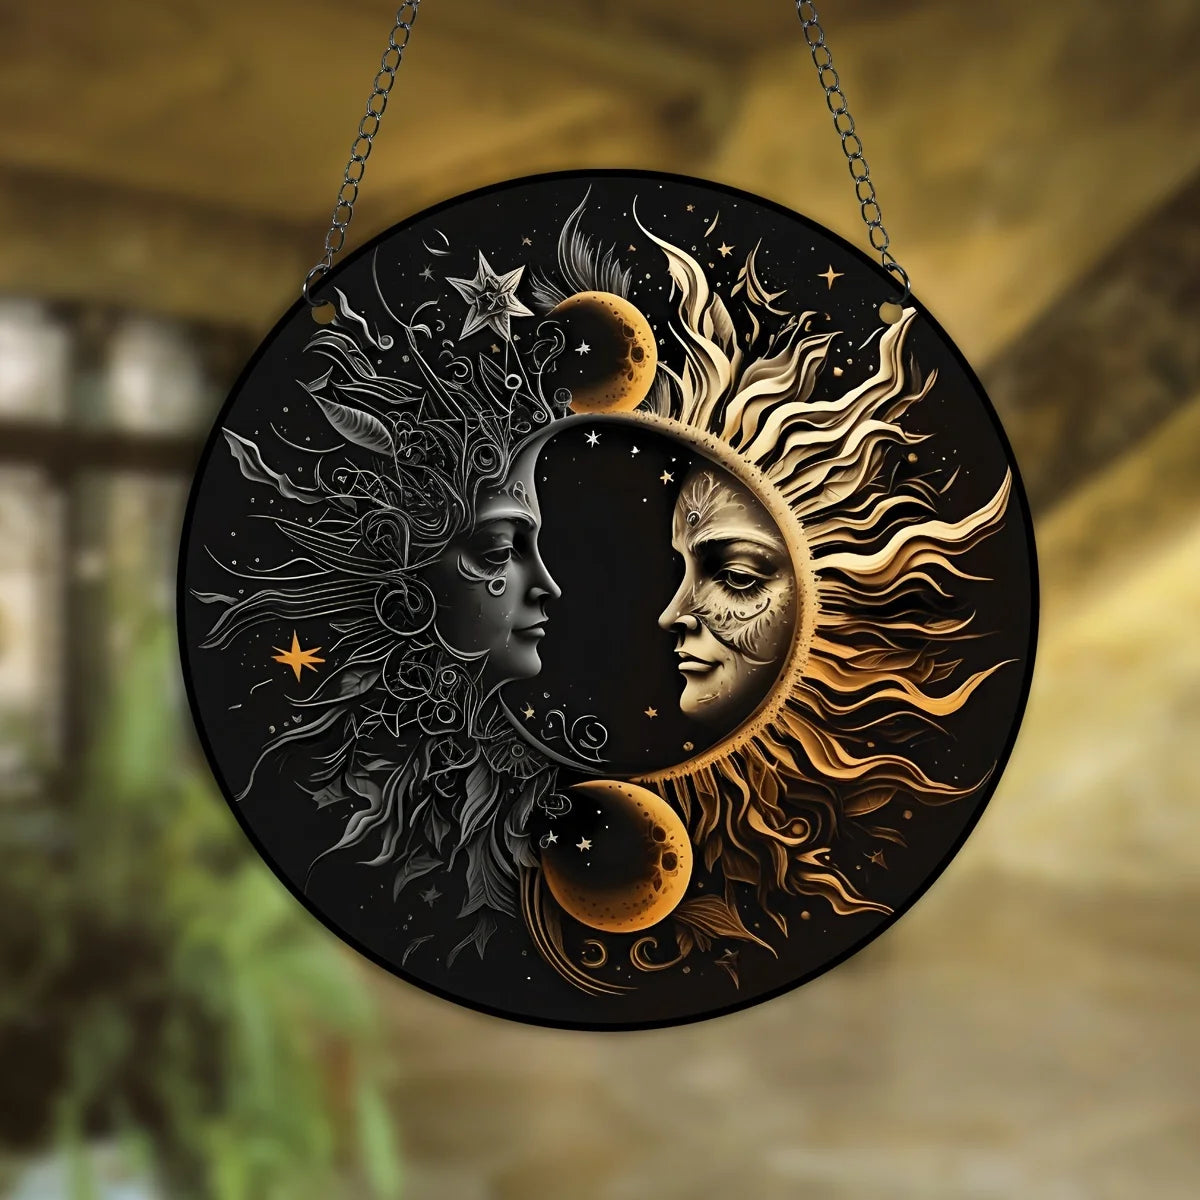 Sun and Moon Acrylic Decoration with Metal Chain Stain Plastic Wall Art Decor Yard Craft Christmas Decor Stained Suncatcher